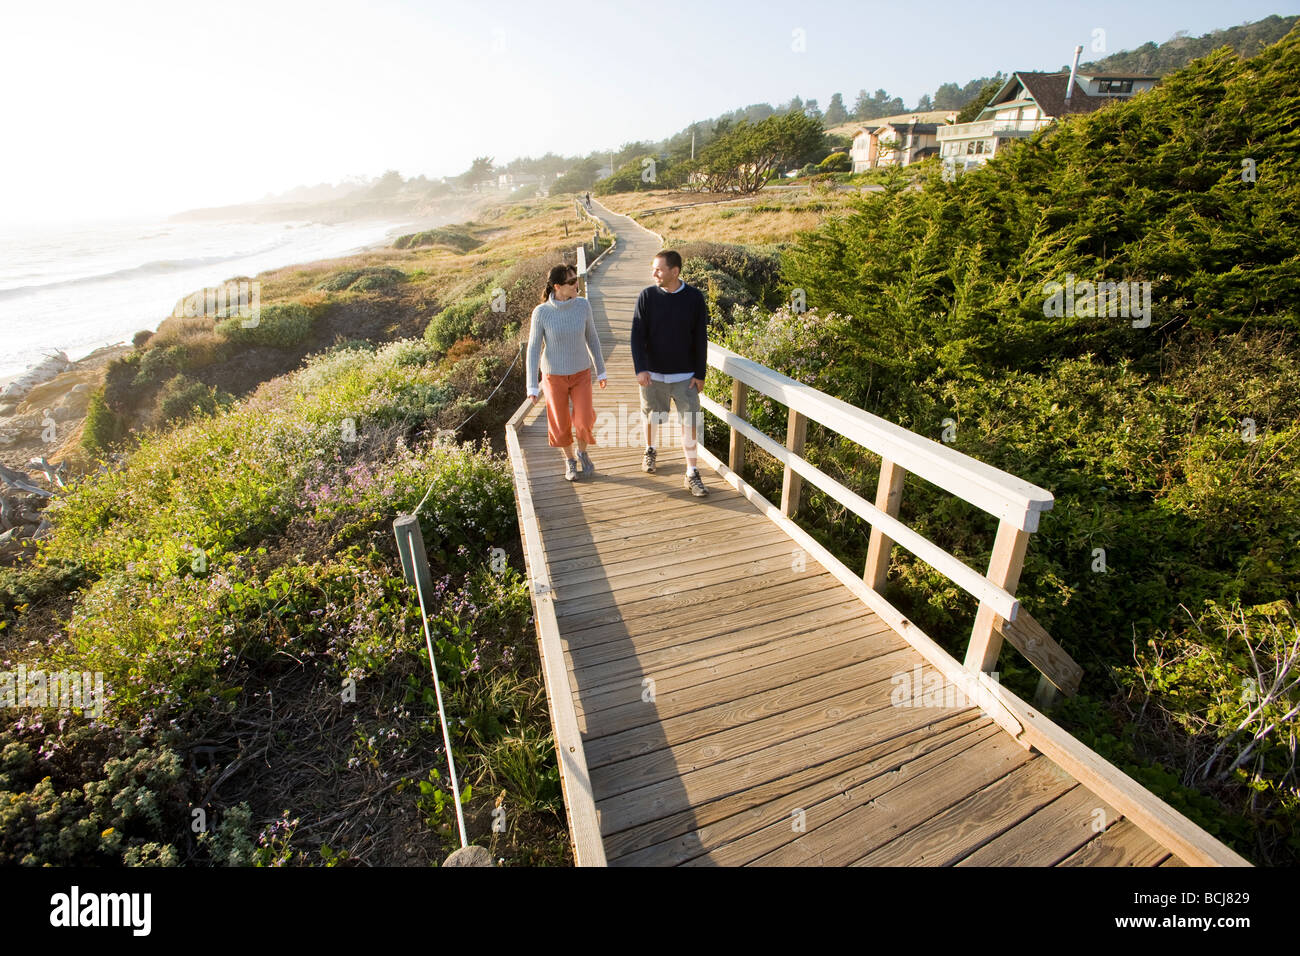 Male and female couple walking on wooden boardwalk path along cliffs beach in Cambria California with view of Pacific Ocean Stock Photo